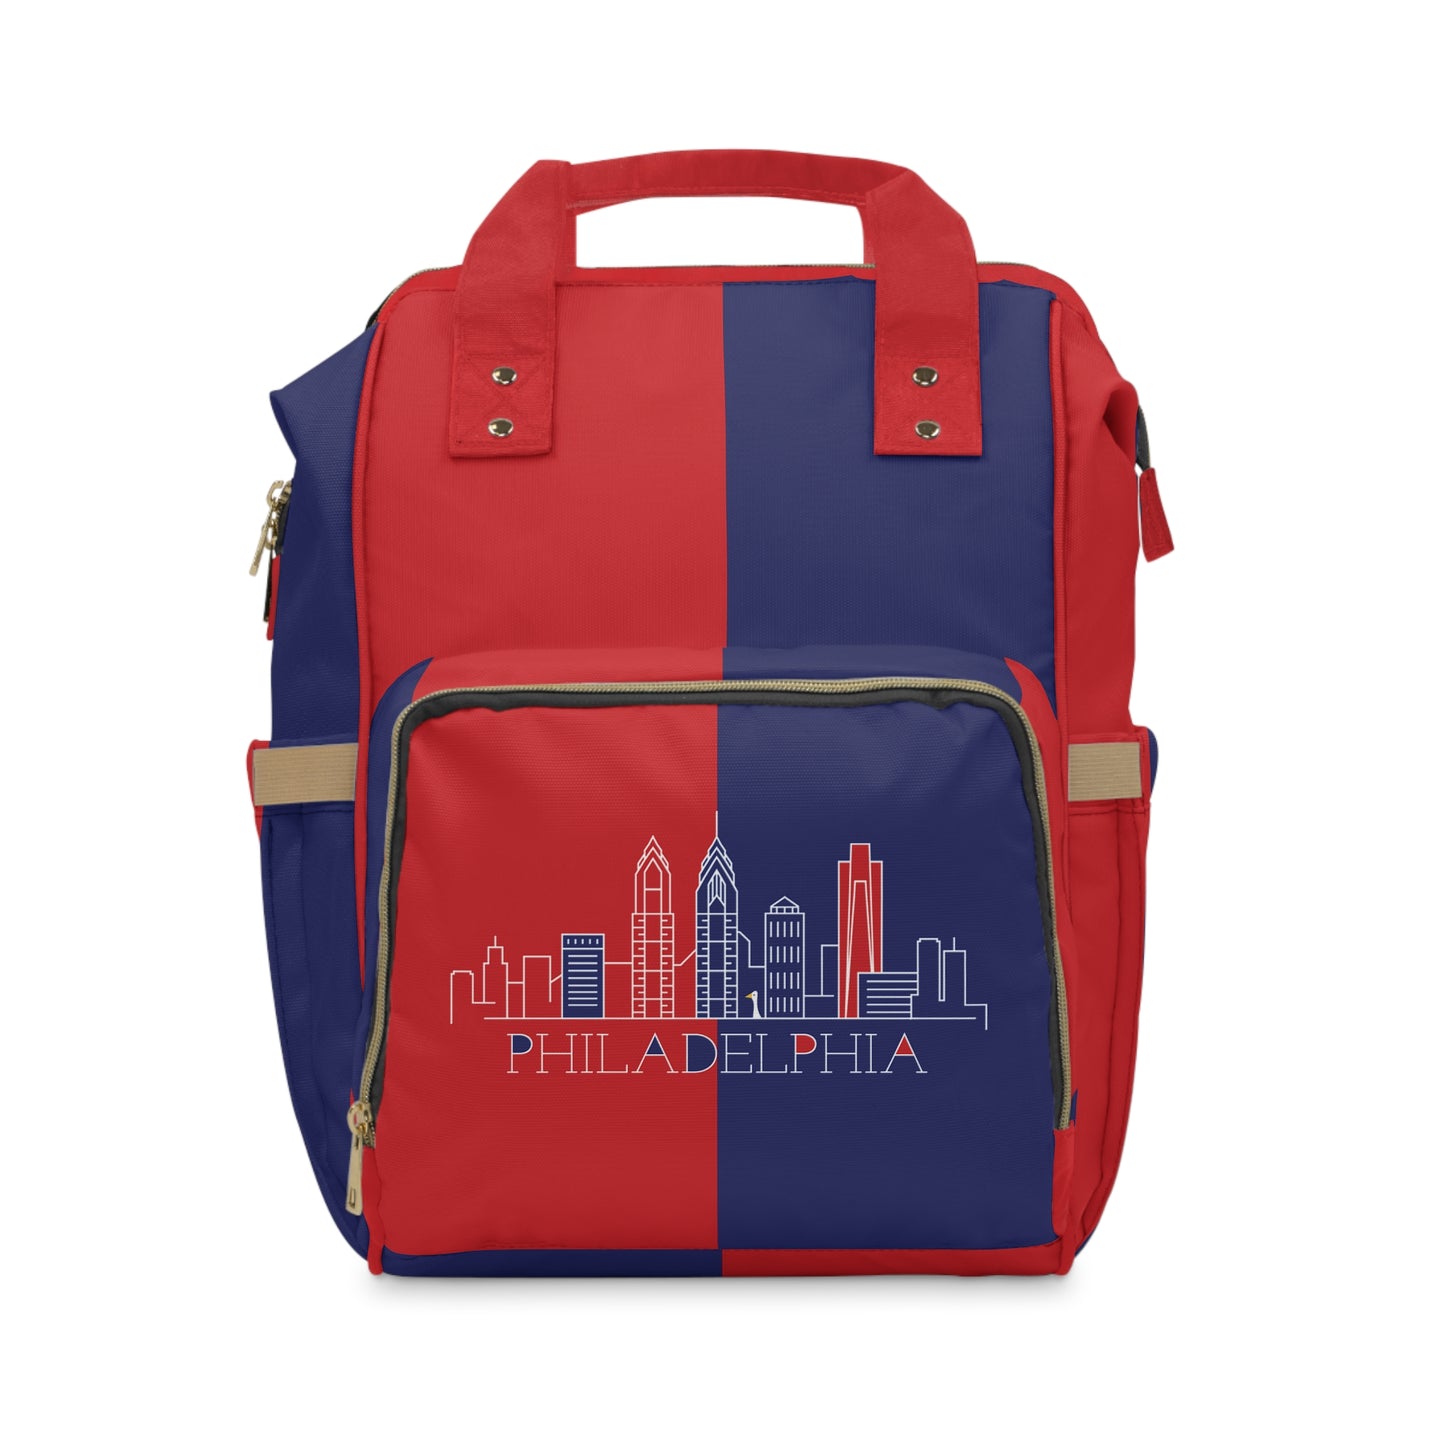 Philadelphia - Red White and Blue City series - Multifunctional Diaper Backpack